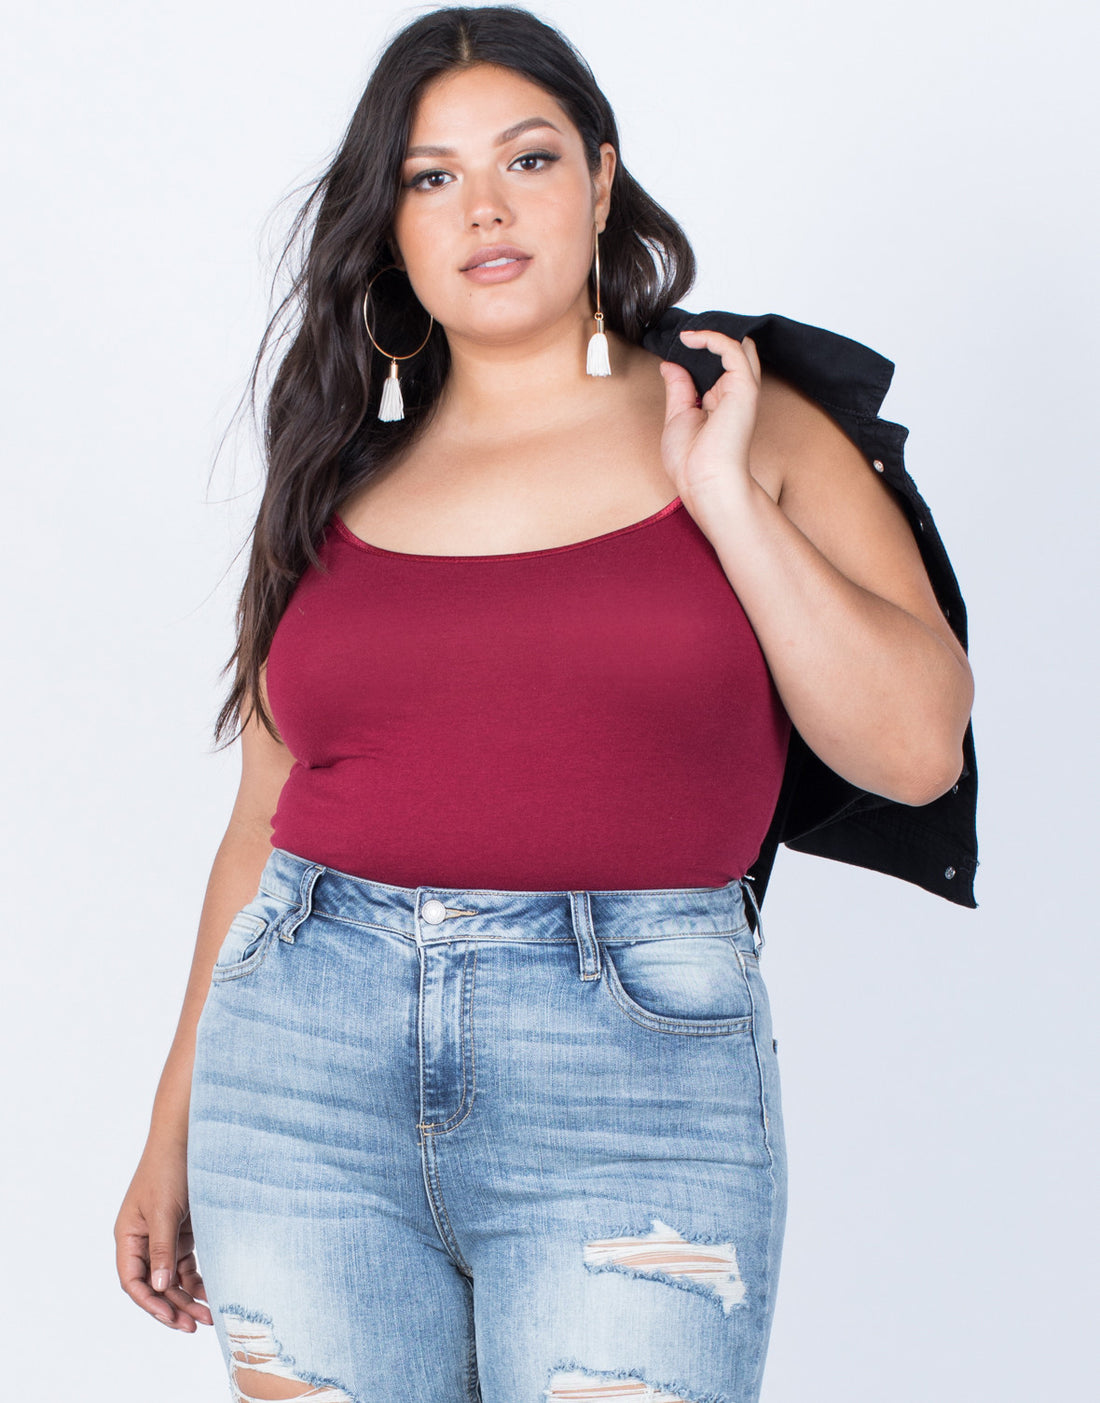 Curve Must-Have Cami Tank Plus Size Tops Burgundy 1XL -2020AVE